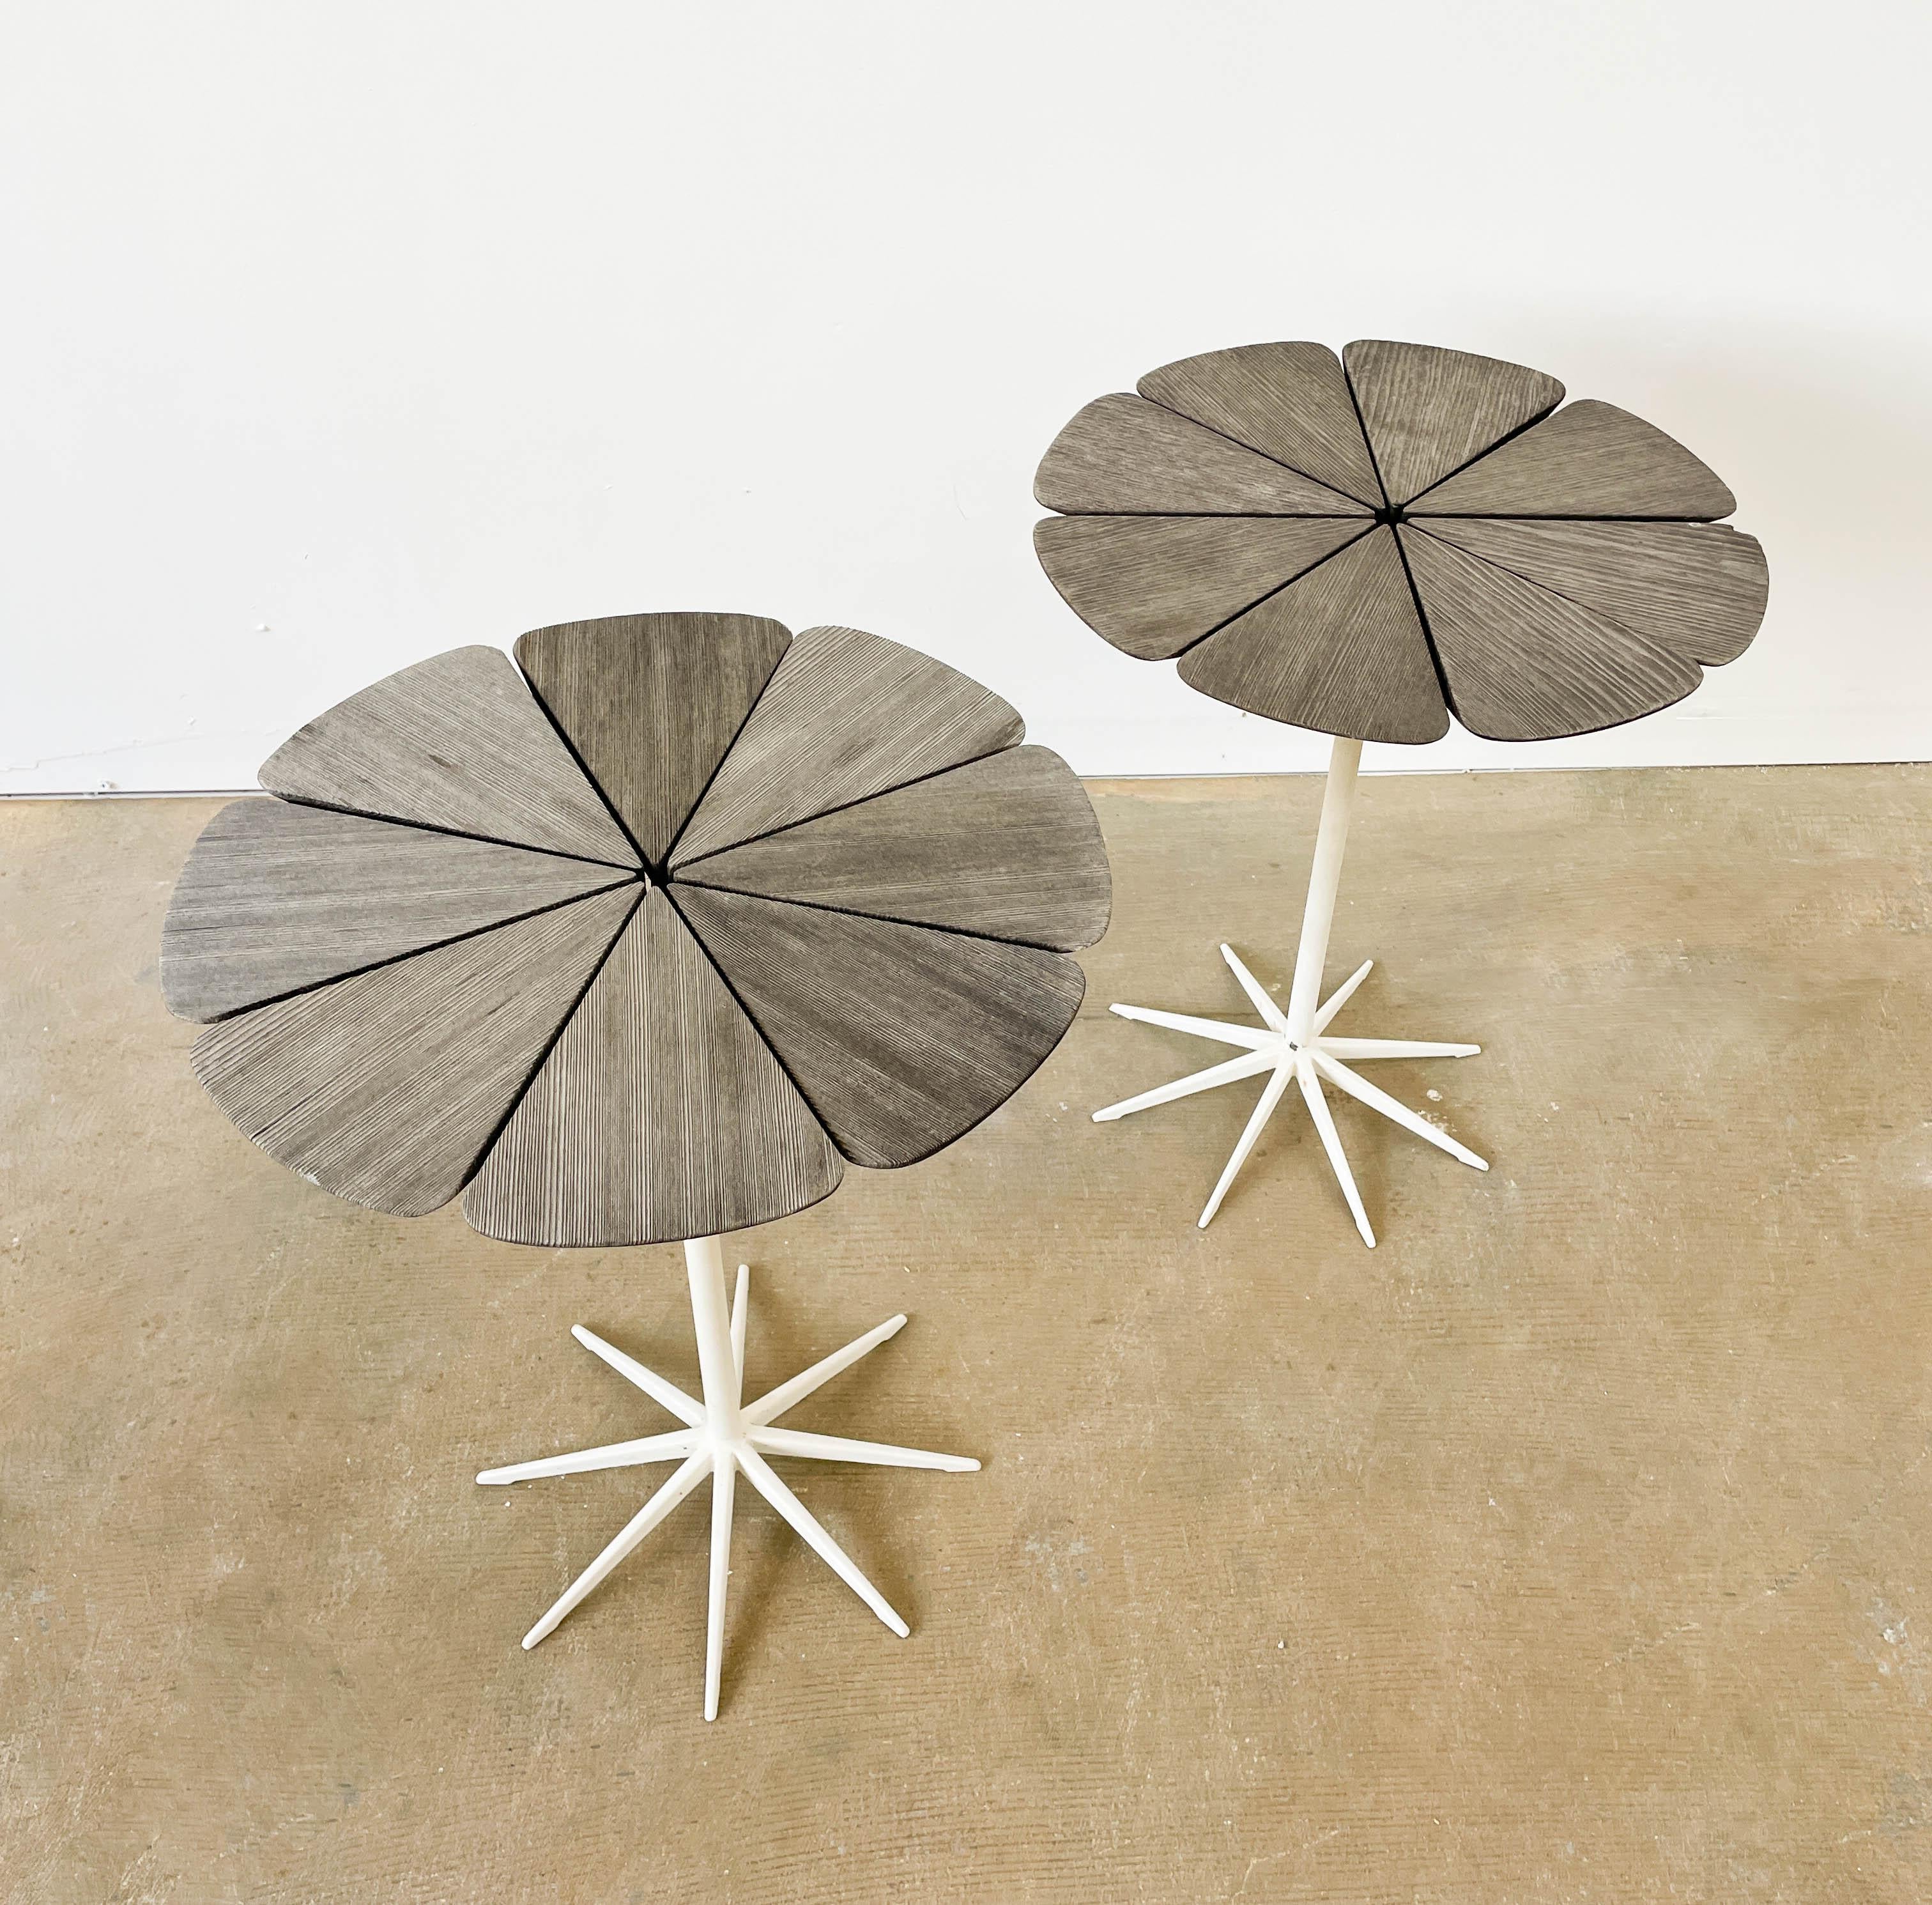 This pair of Petal Tables designed by Richard Schultz features beautifully weathered rosewood petals in a variety of gray tones. Sold by Knoll International in approximately 1965. Each of the petal pieces is a delicate work of art. There is one